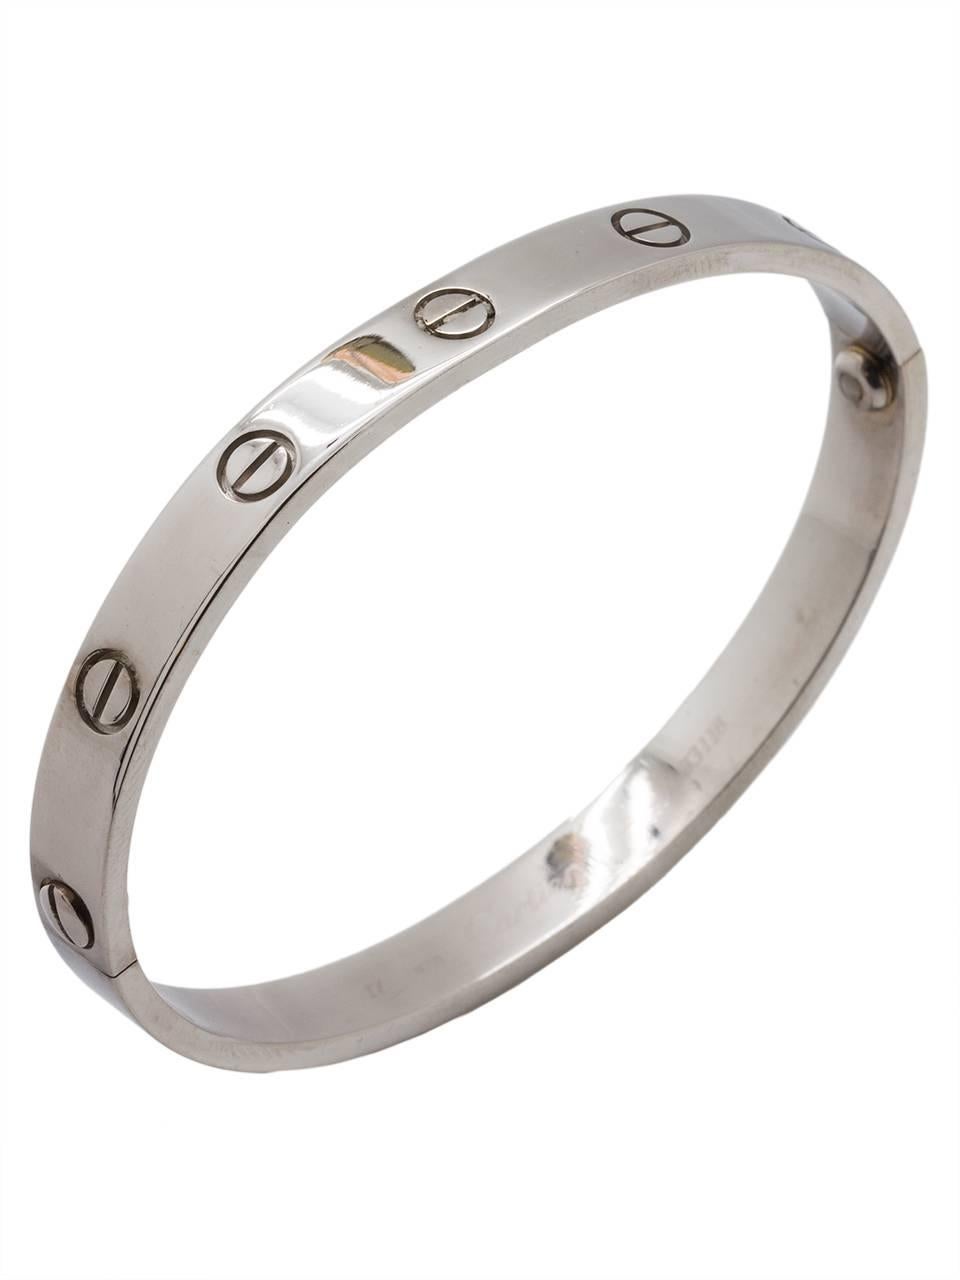 
Stunning, classic Cartier 18K white gold “Love Bracelet” size 17 in excellent preowned condition. Size 17 is one of the most popular sizes for a woman’s wrist. Of course guaranteed genuine.

SKU: 48702